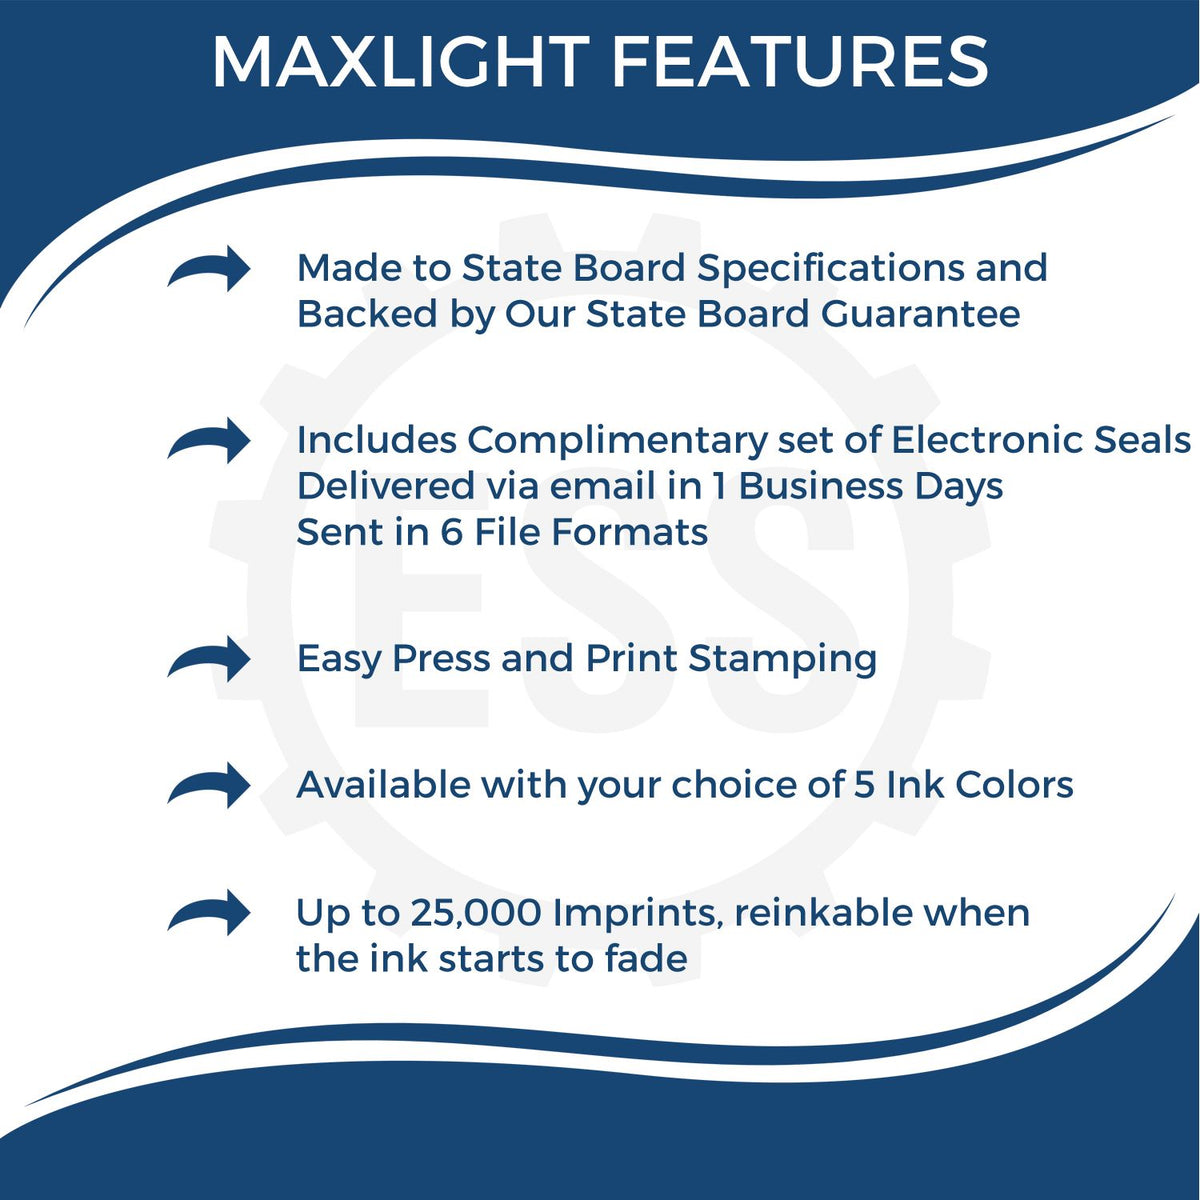 A picture of an infographic highlighting the selling points for the Premium MaxLight Pre-Inked Massachusetts Engineering Stamp